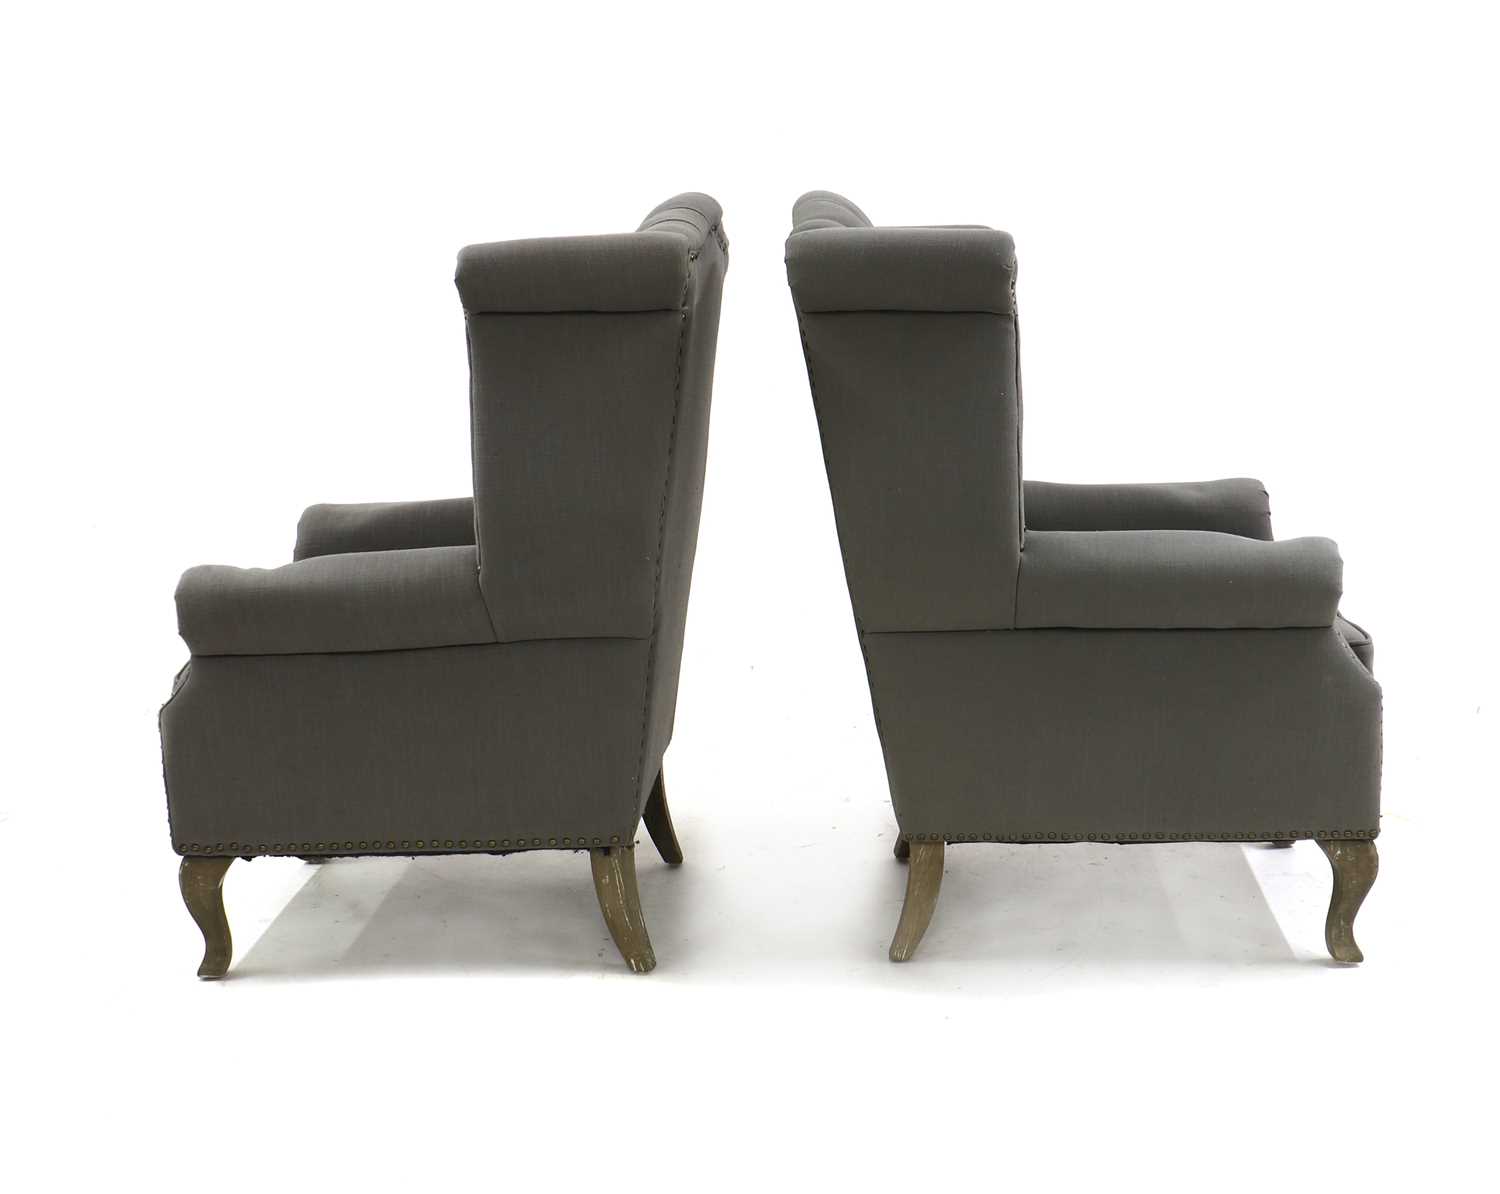 A pair of Queen Anne style wingback chairs, - Image 2 of 3